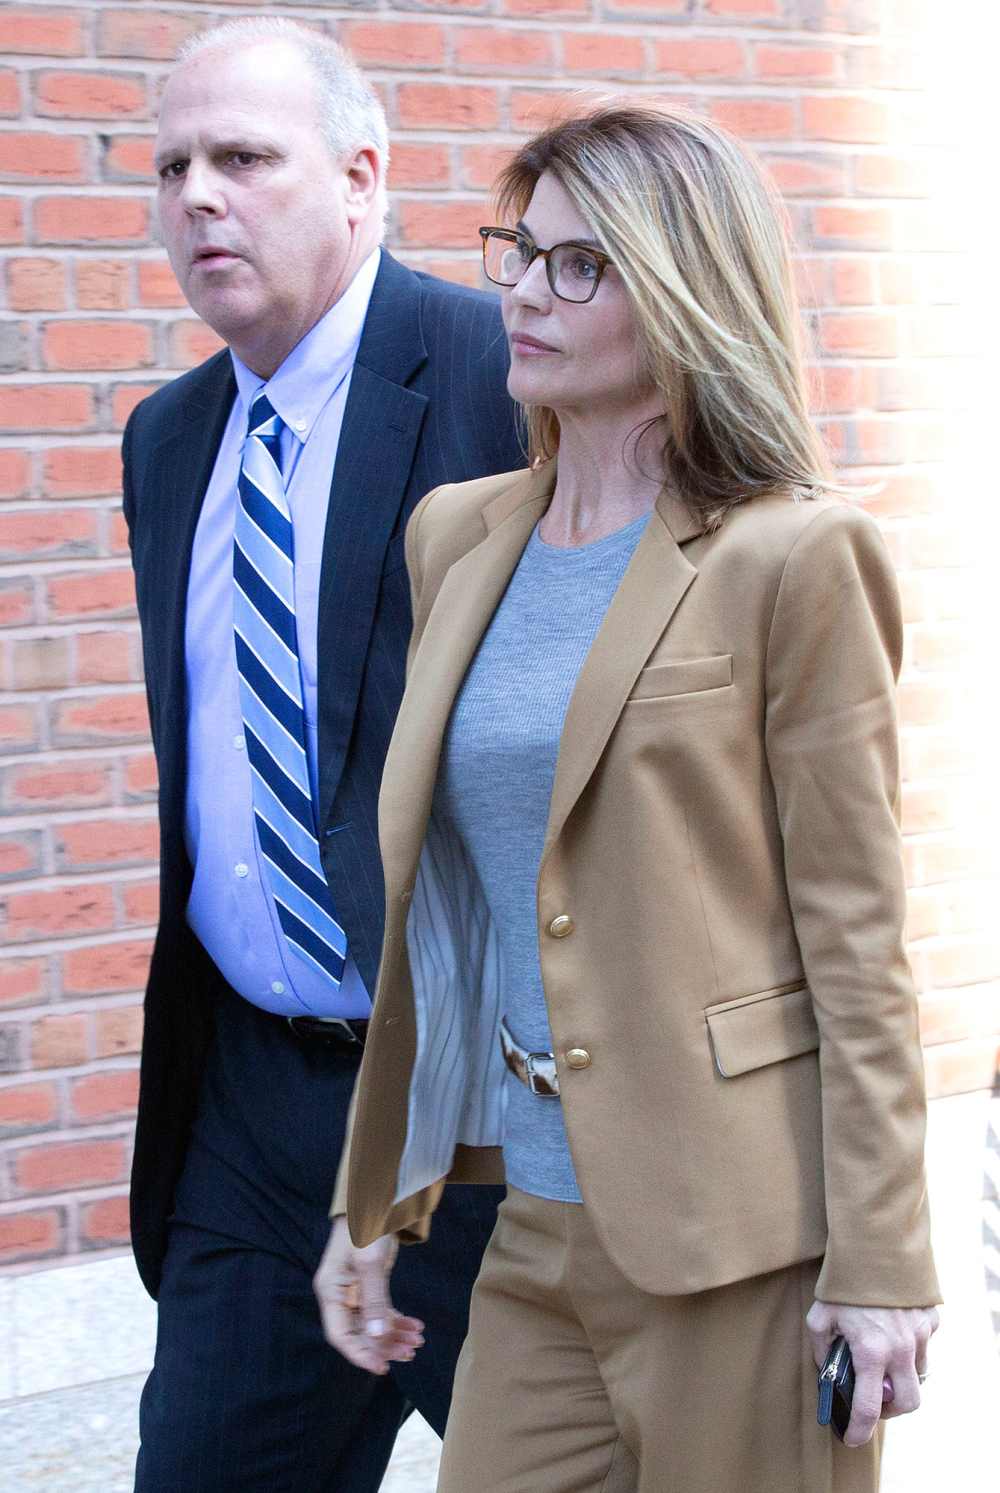 Lori Loughlin's Attorneys Are Going to Play Ignorance Card